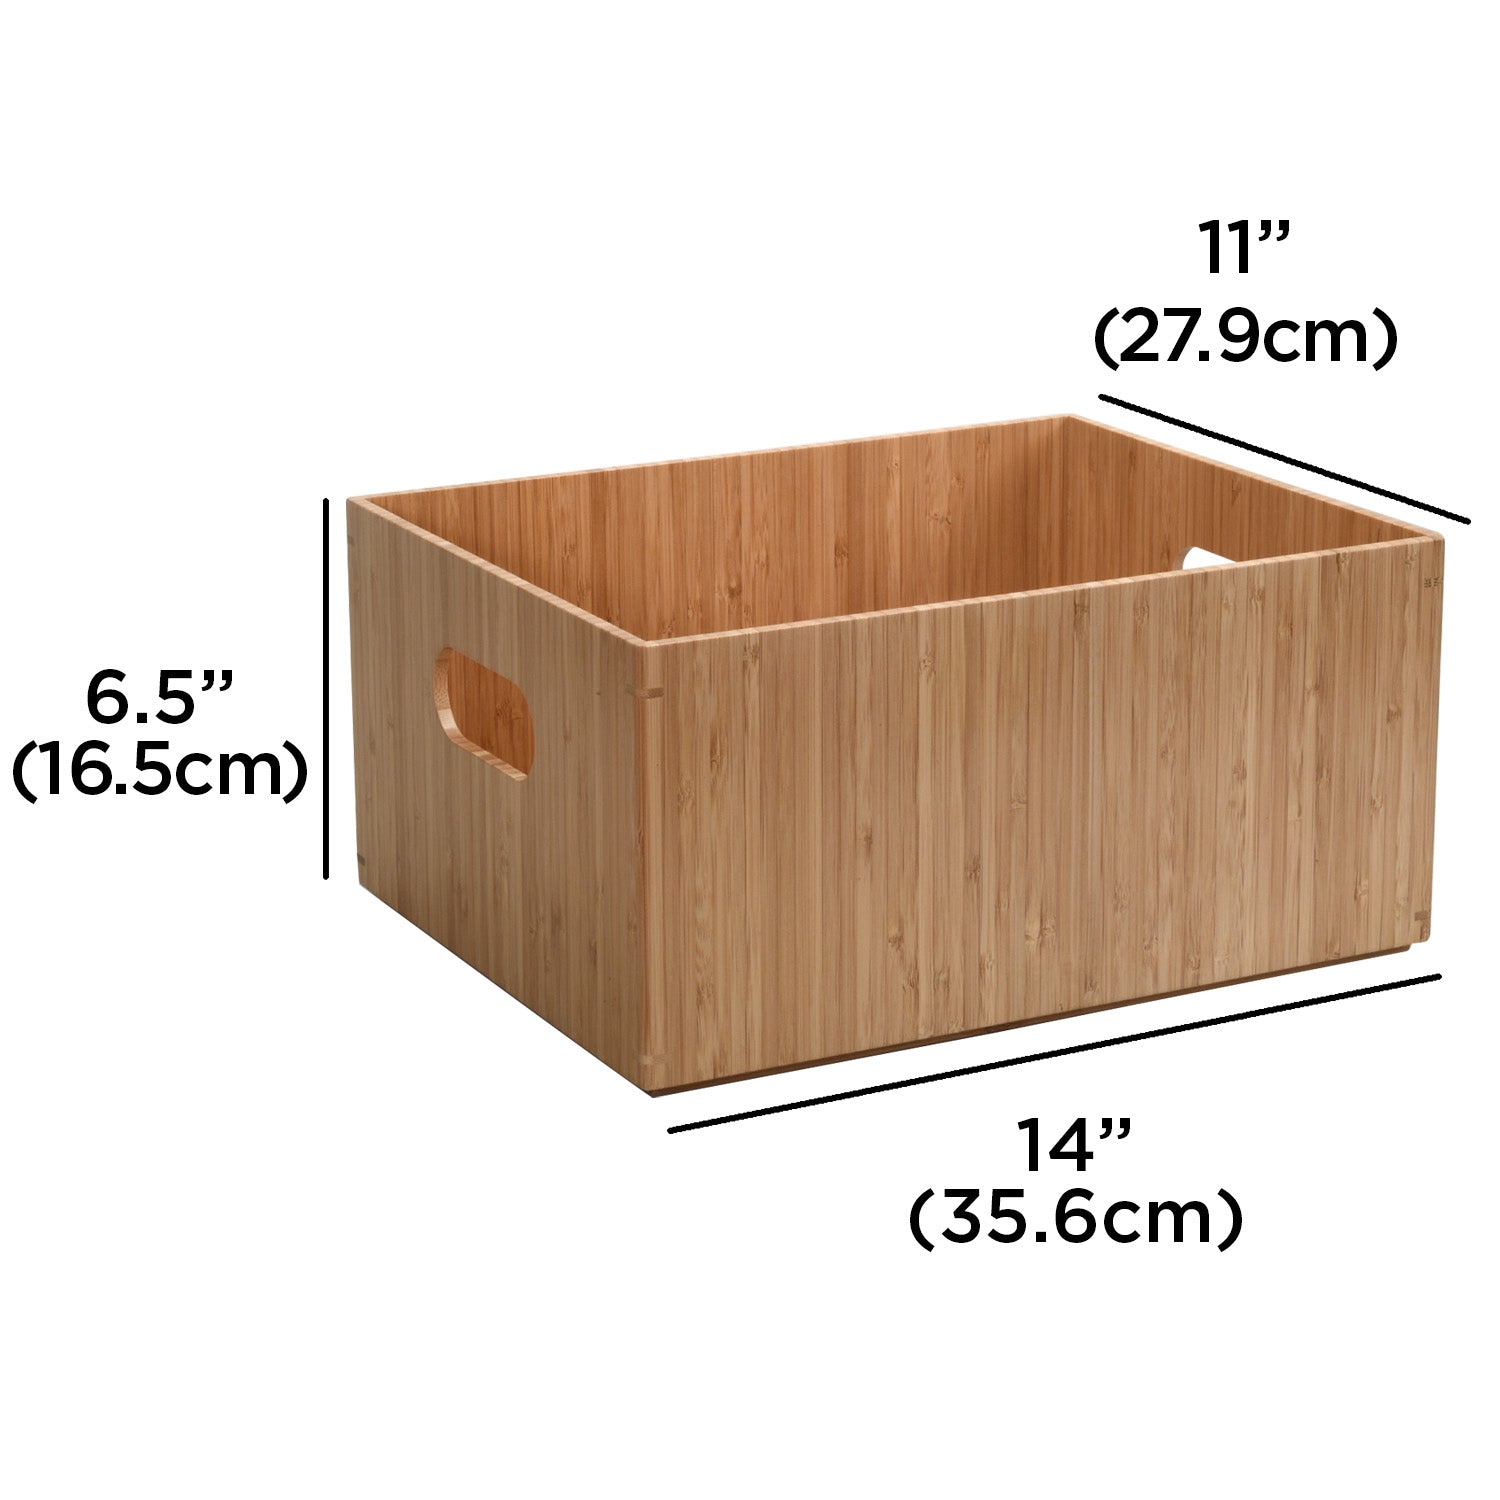 Mobilevision Bamboo Storage Box Multi-Purpose Organizer for Kitchen Supplies Holder, Fruit Bin, Cabinets, Pantry with Built in Handles, Stackable